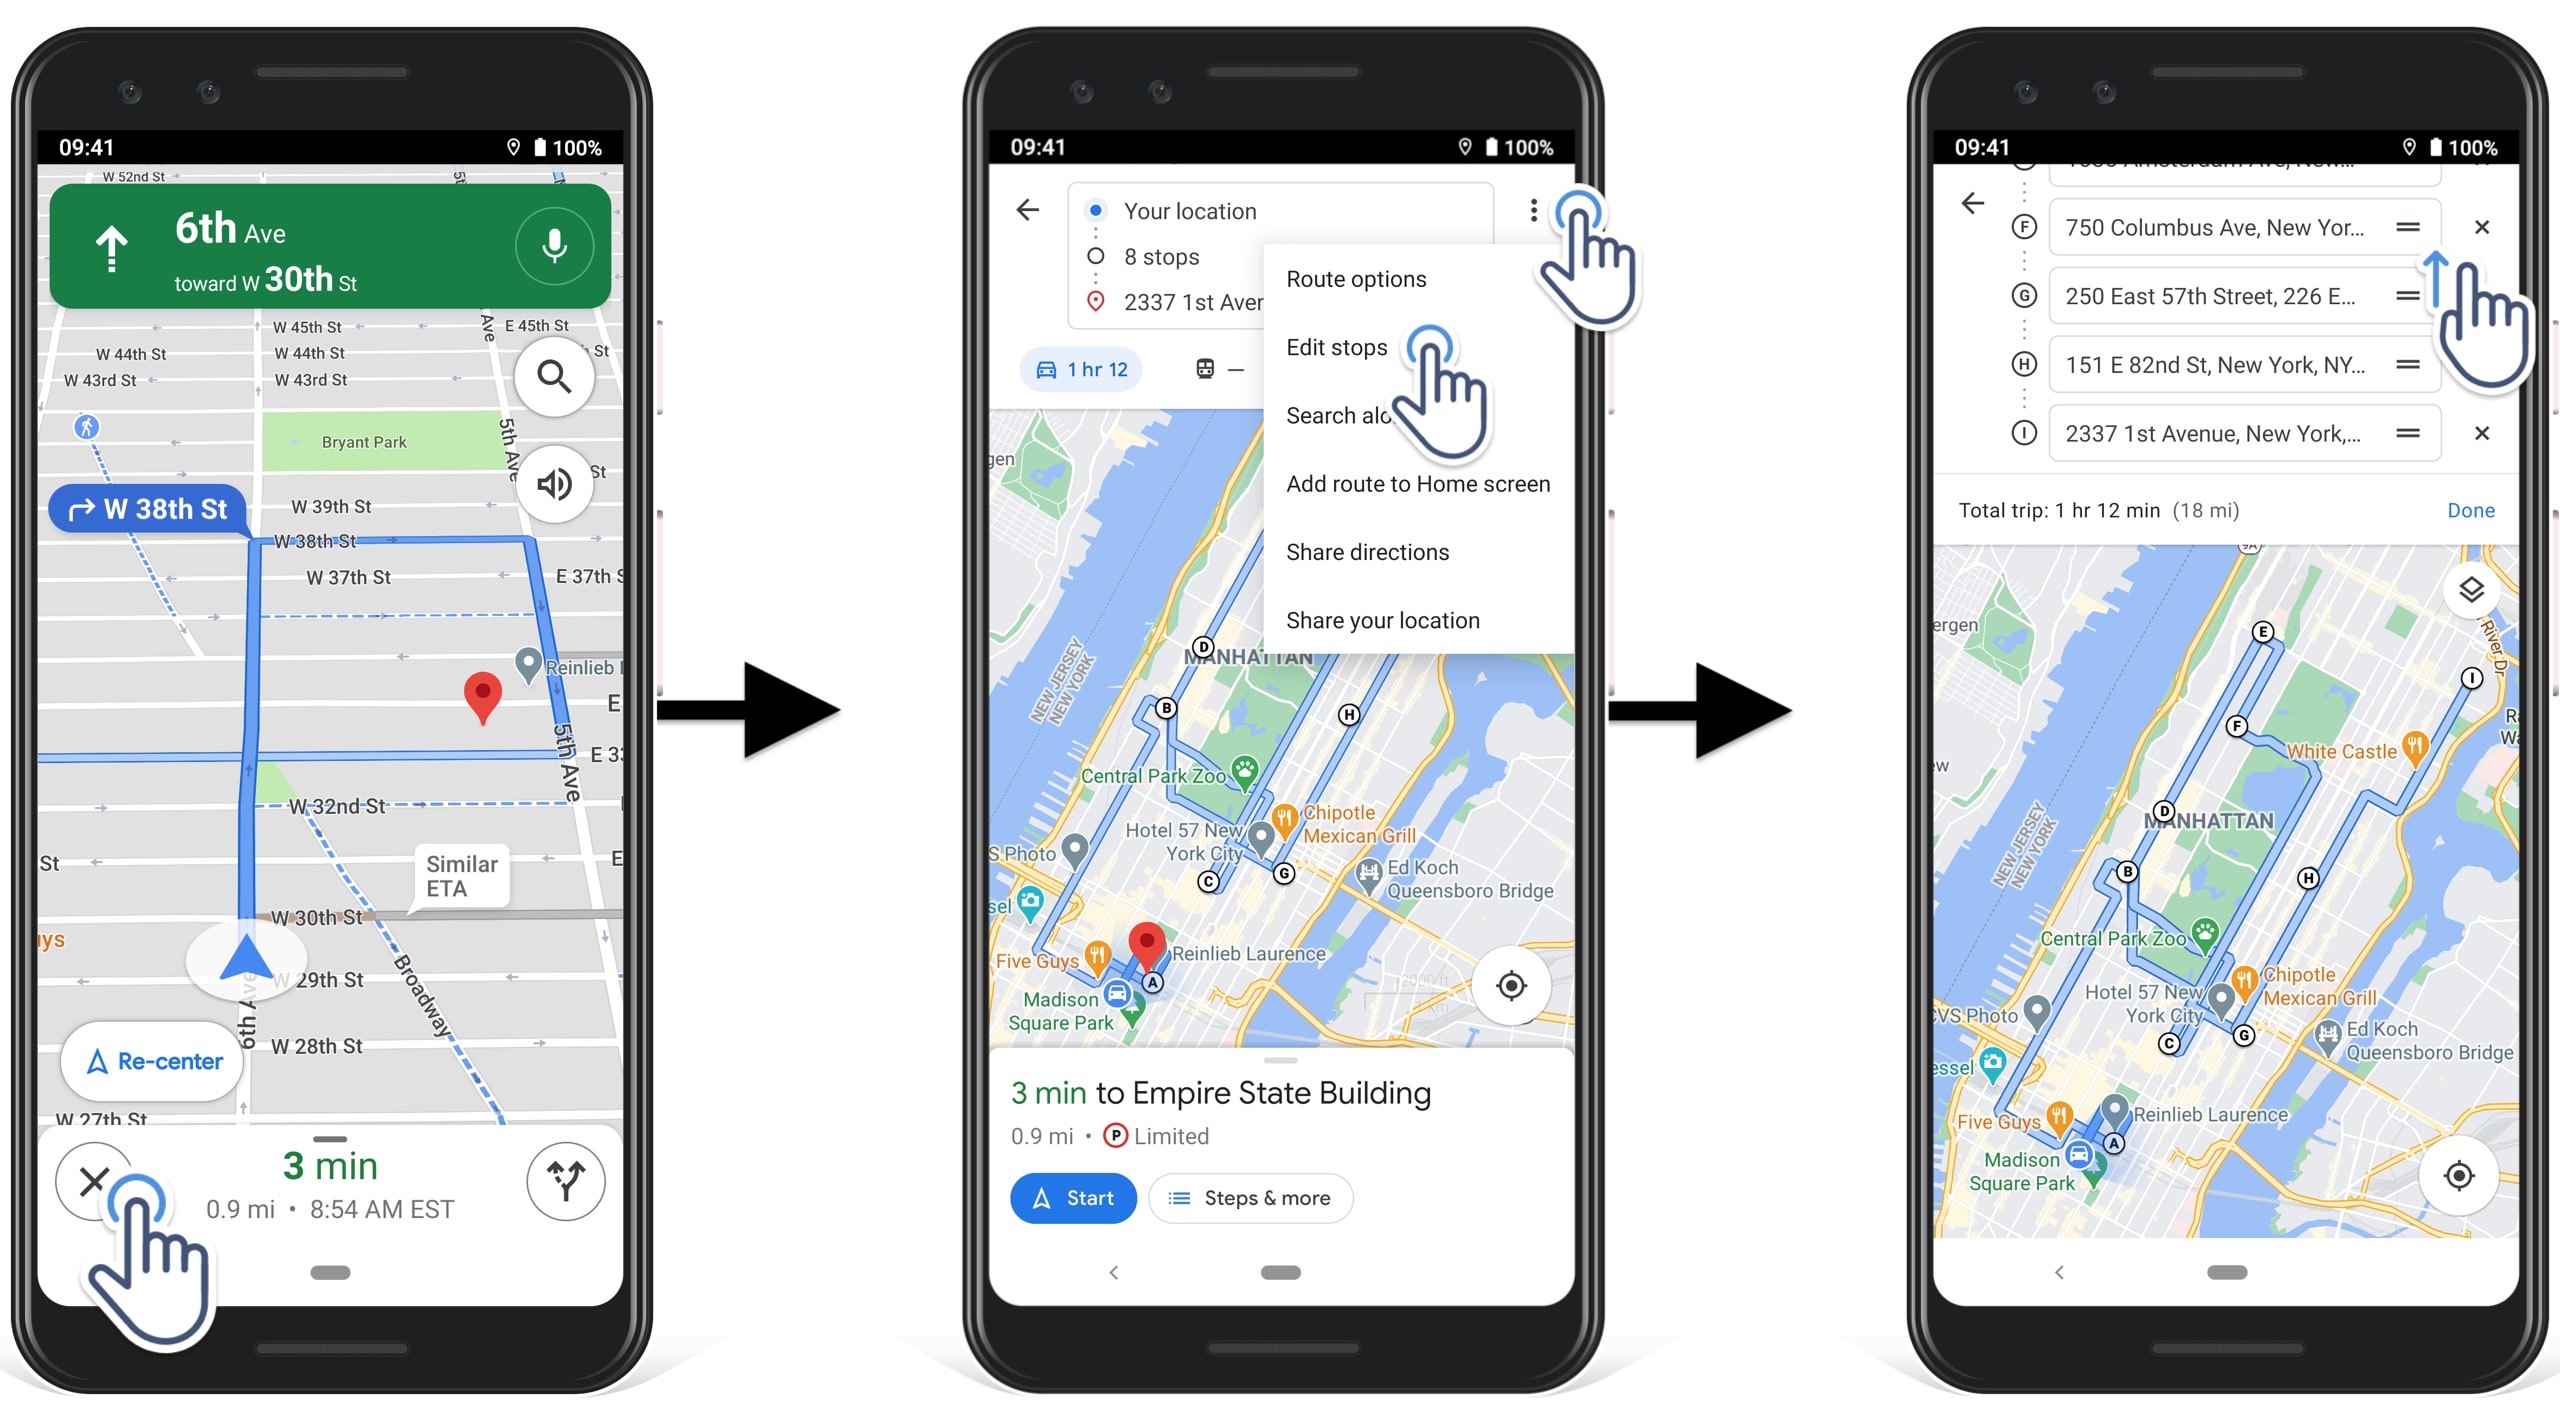 Edit a multi stop route with multiple destinations on the Google Maps multi stop route planner app